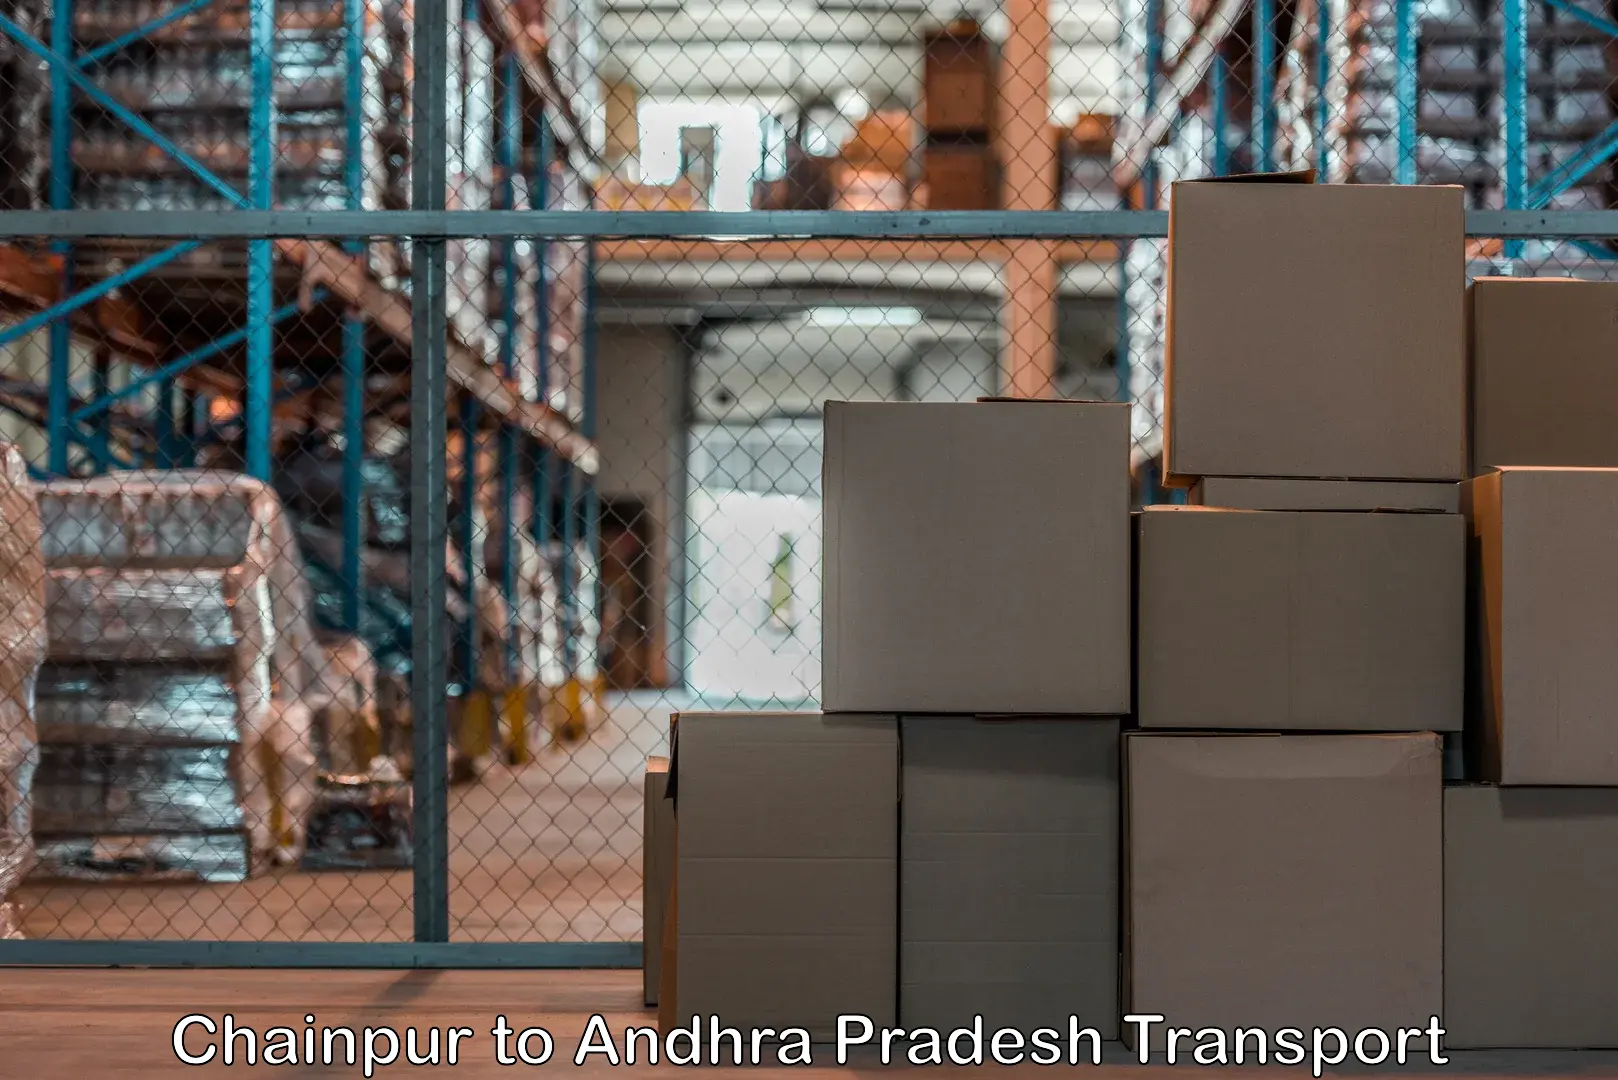 Domestic goods transportation services Chainpur to Kothapalli